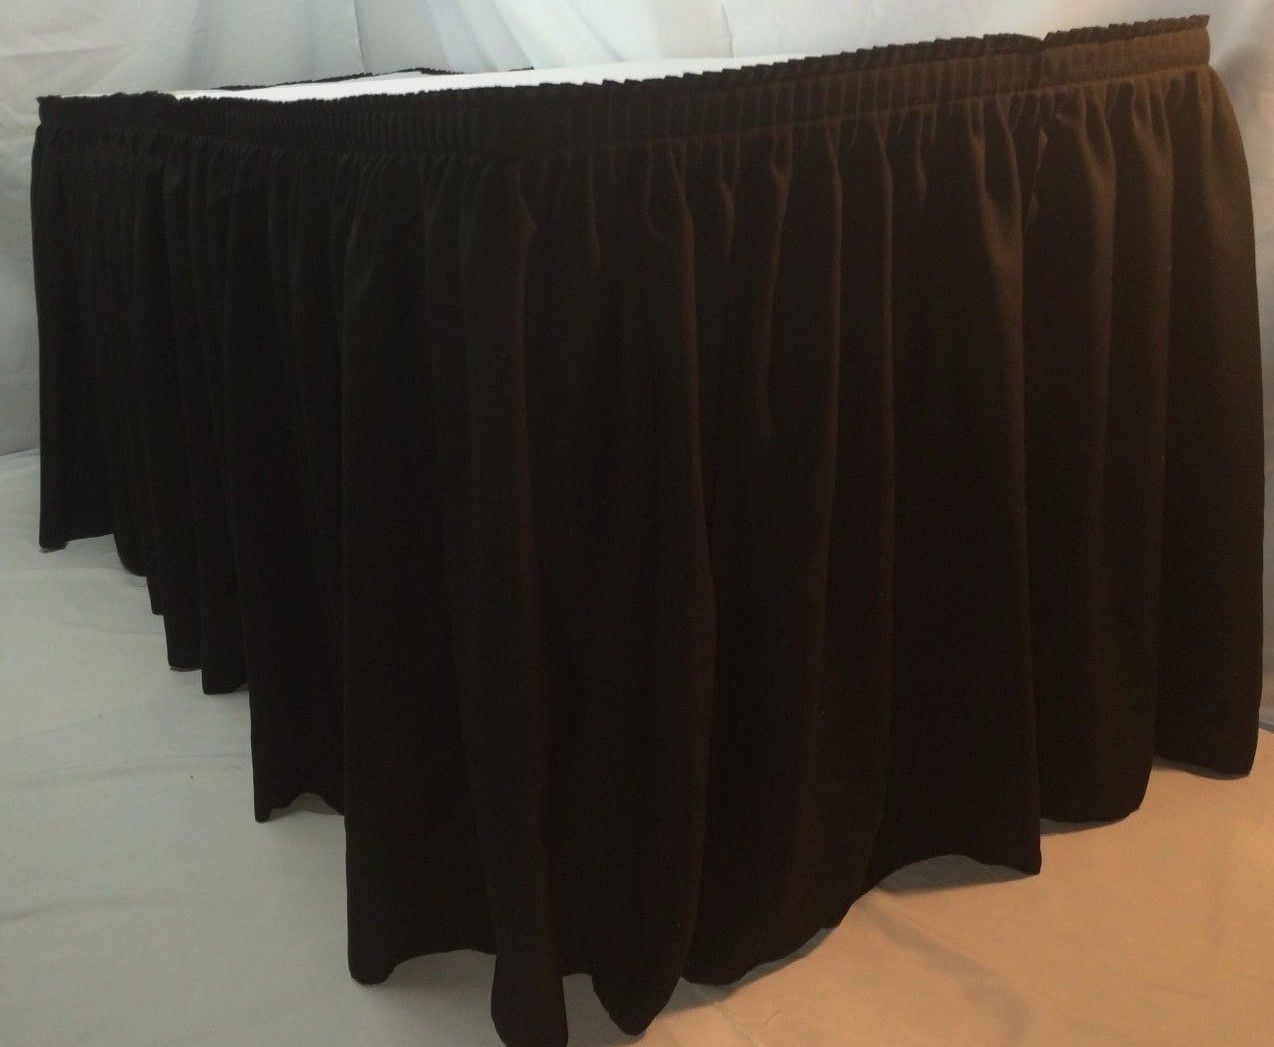 Birthday Banquet Tablewear Catering Event Decoration 1 piece Trimming Shop Black 14 Feet Pleated Rectangle Polyester Table Skirt for Wedding Parties 